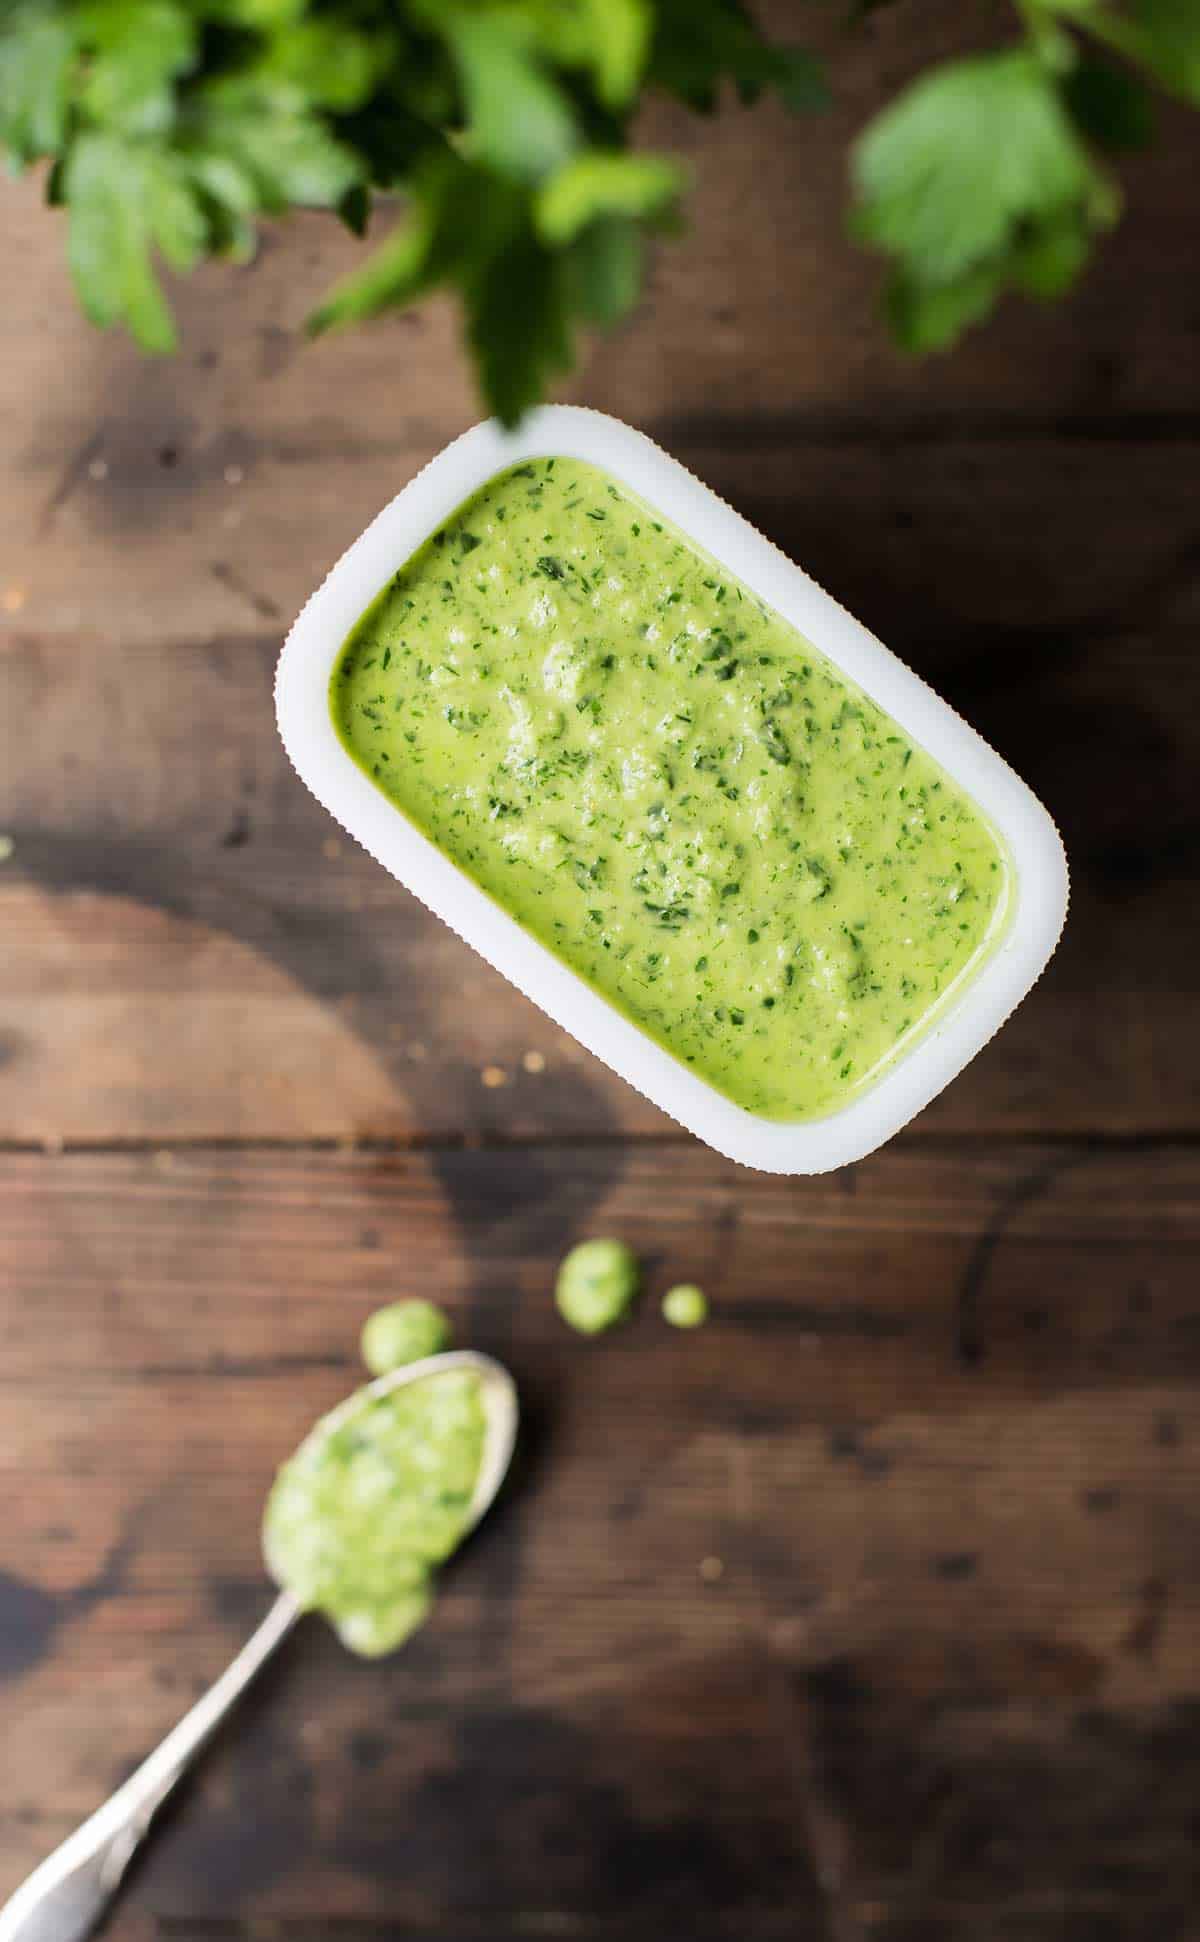 Creamy bright green chimichurri sauce with some fresh parsley